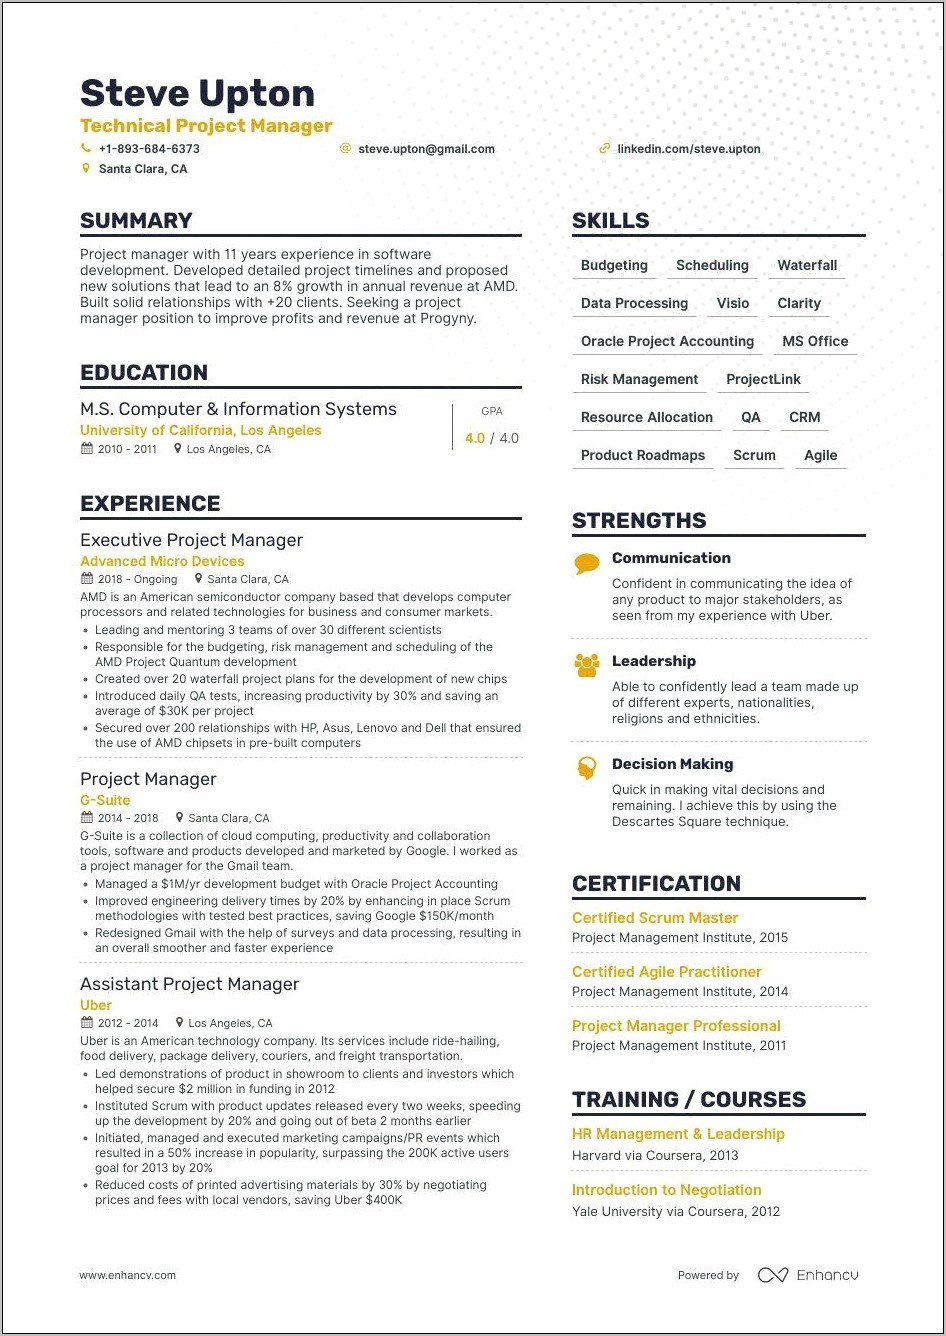 Disability Support Worker Resume Sample